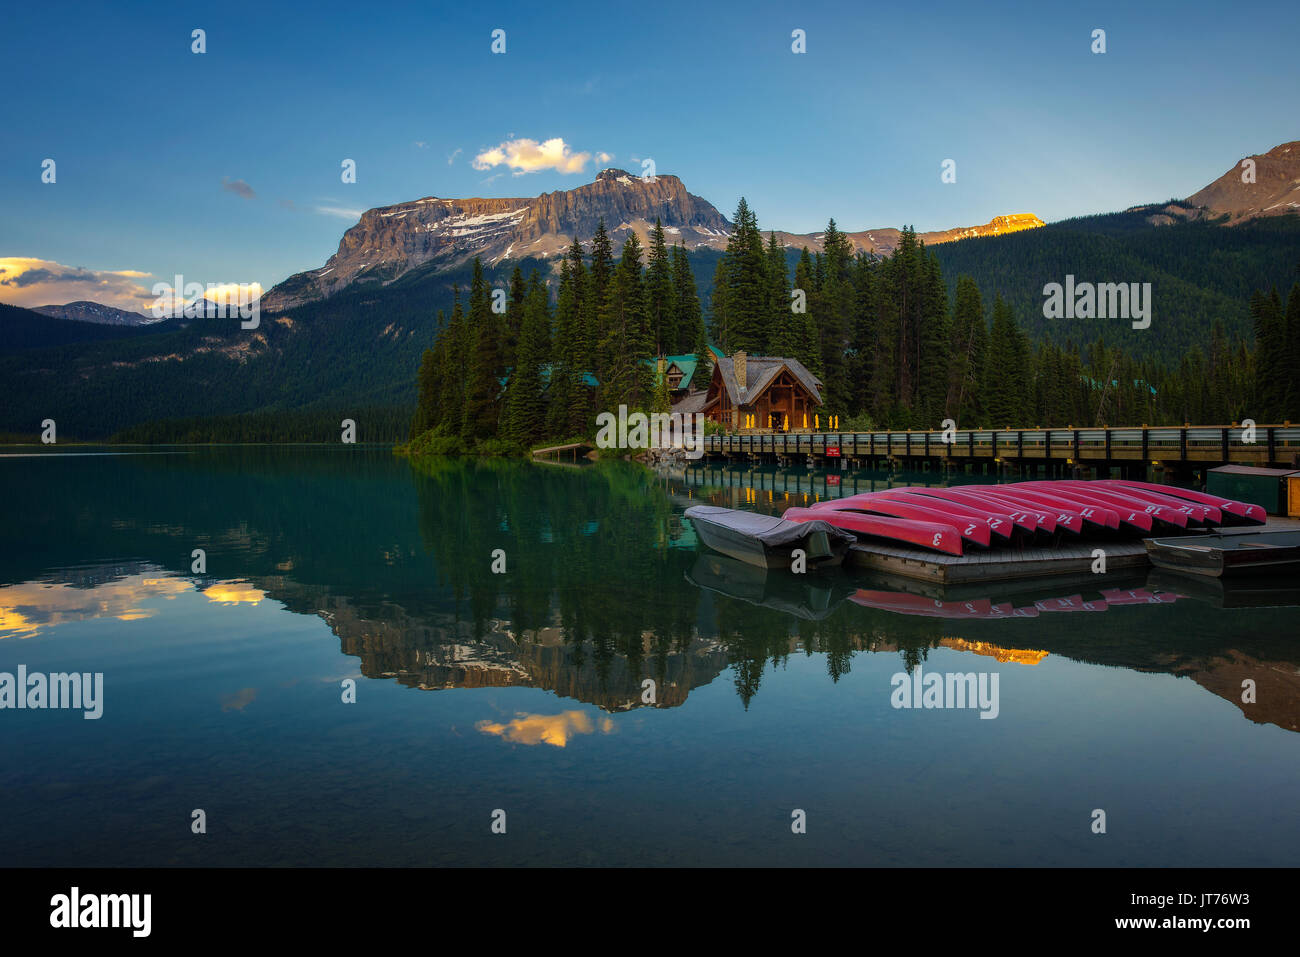 Canoes on beautiful Emerald Lake with lake lodge and restaurant in the background at sunset, Yoho National Park, Canada. Stock Photo